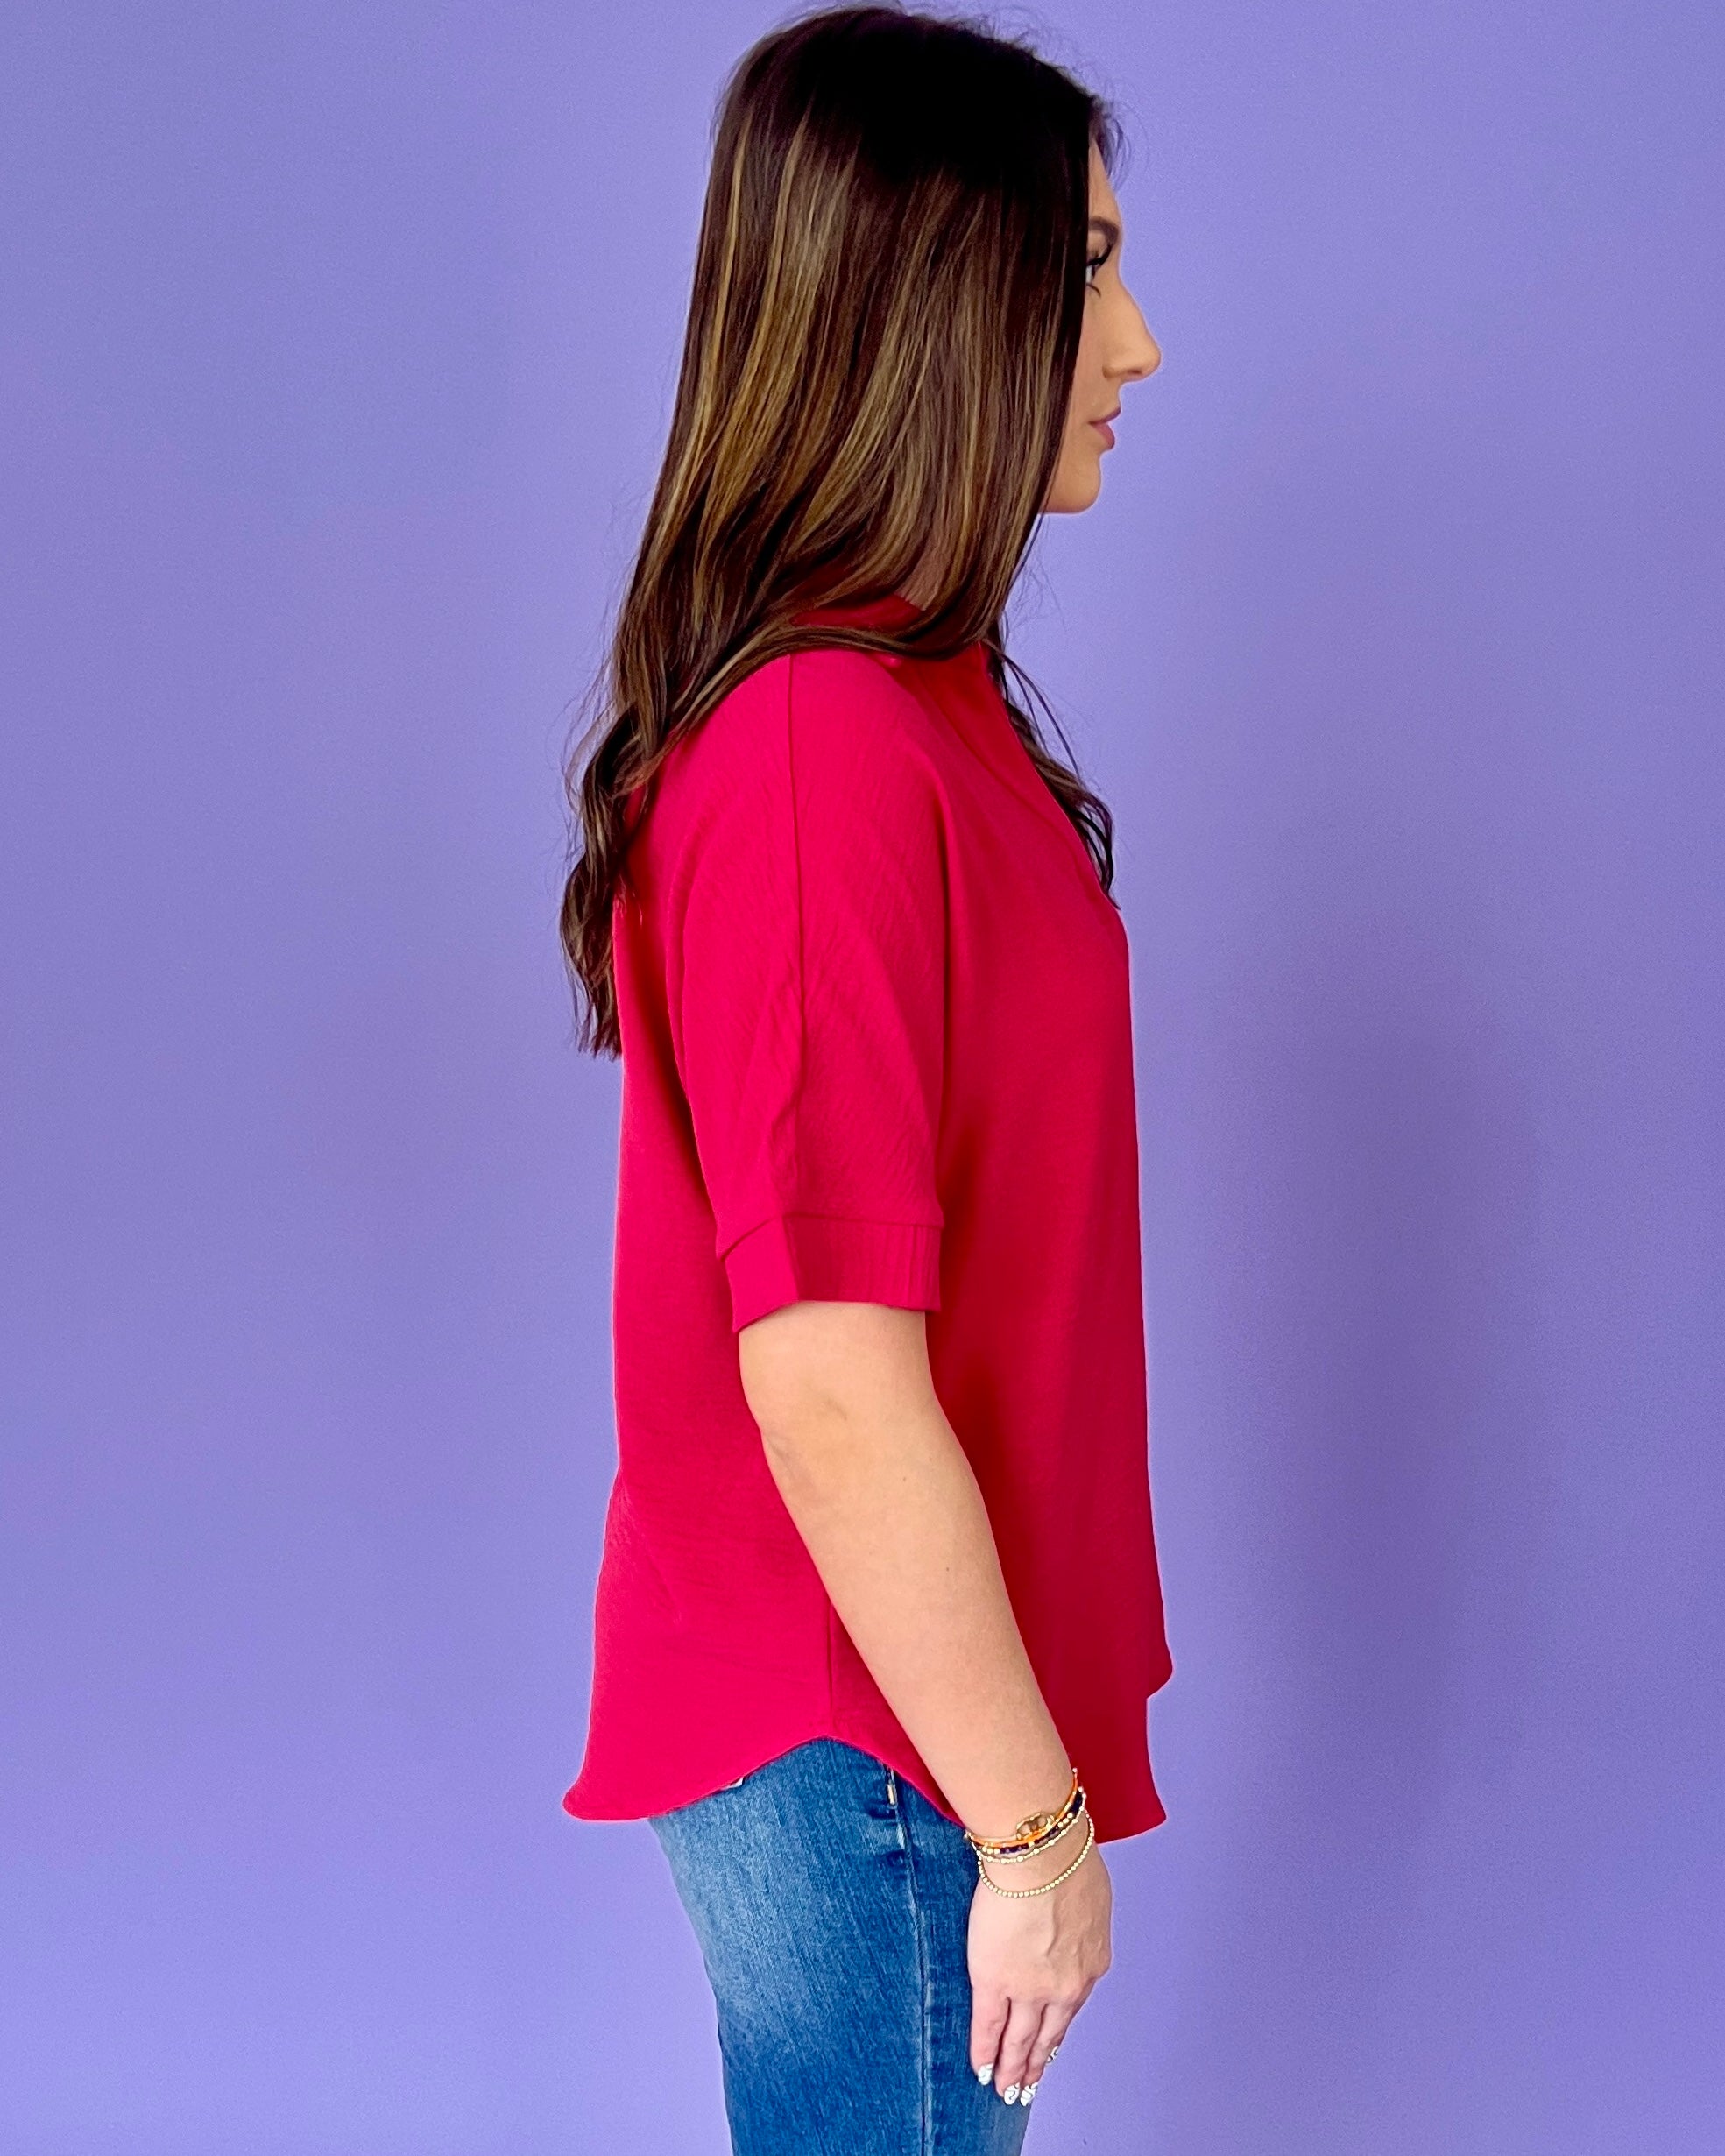 So Right Viva Magenta Collared Top-Shop-Womens-Boutique-Clothing